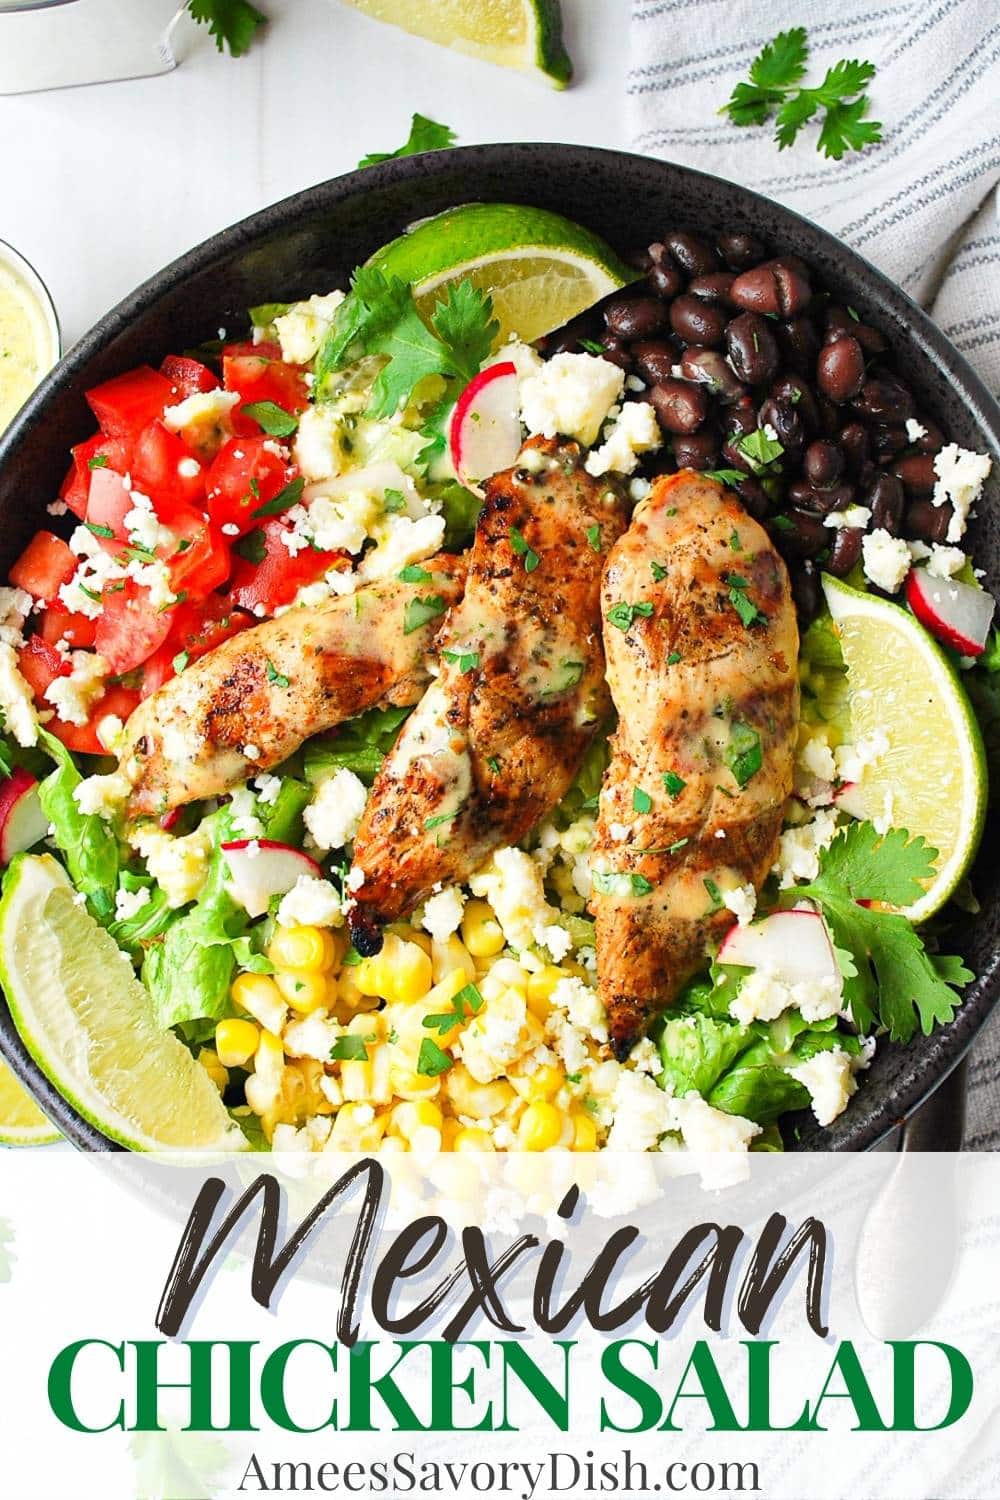 Juicy marinated grilled chicken tossed with crisp greens, fresh vegetables, black beans, queso fresco, and a creamy cilantro lime dressing. via @Ameessavorydish